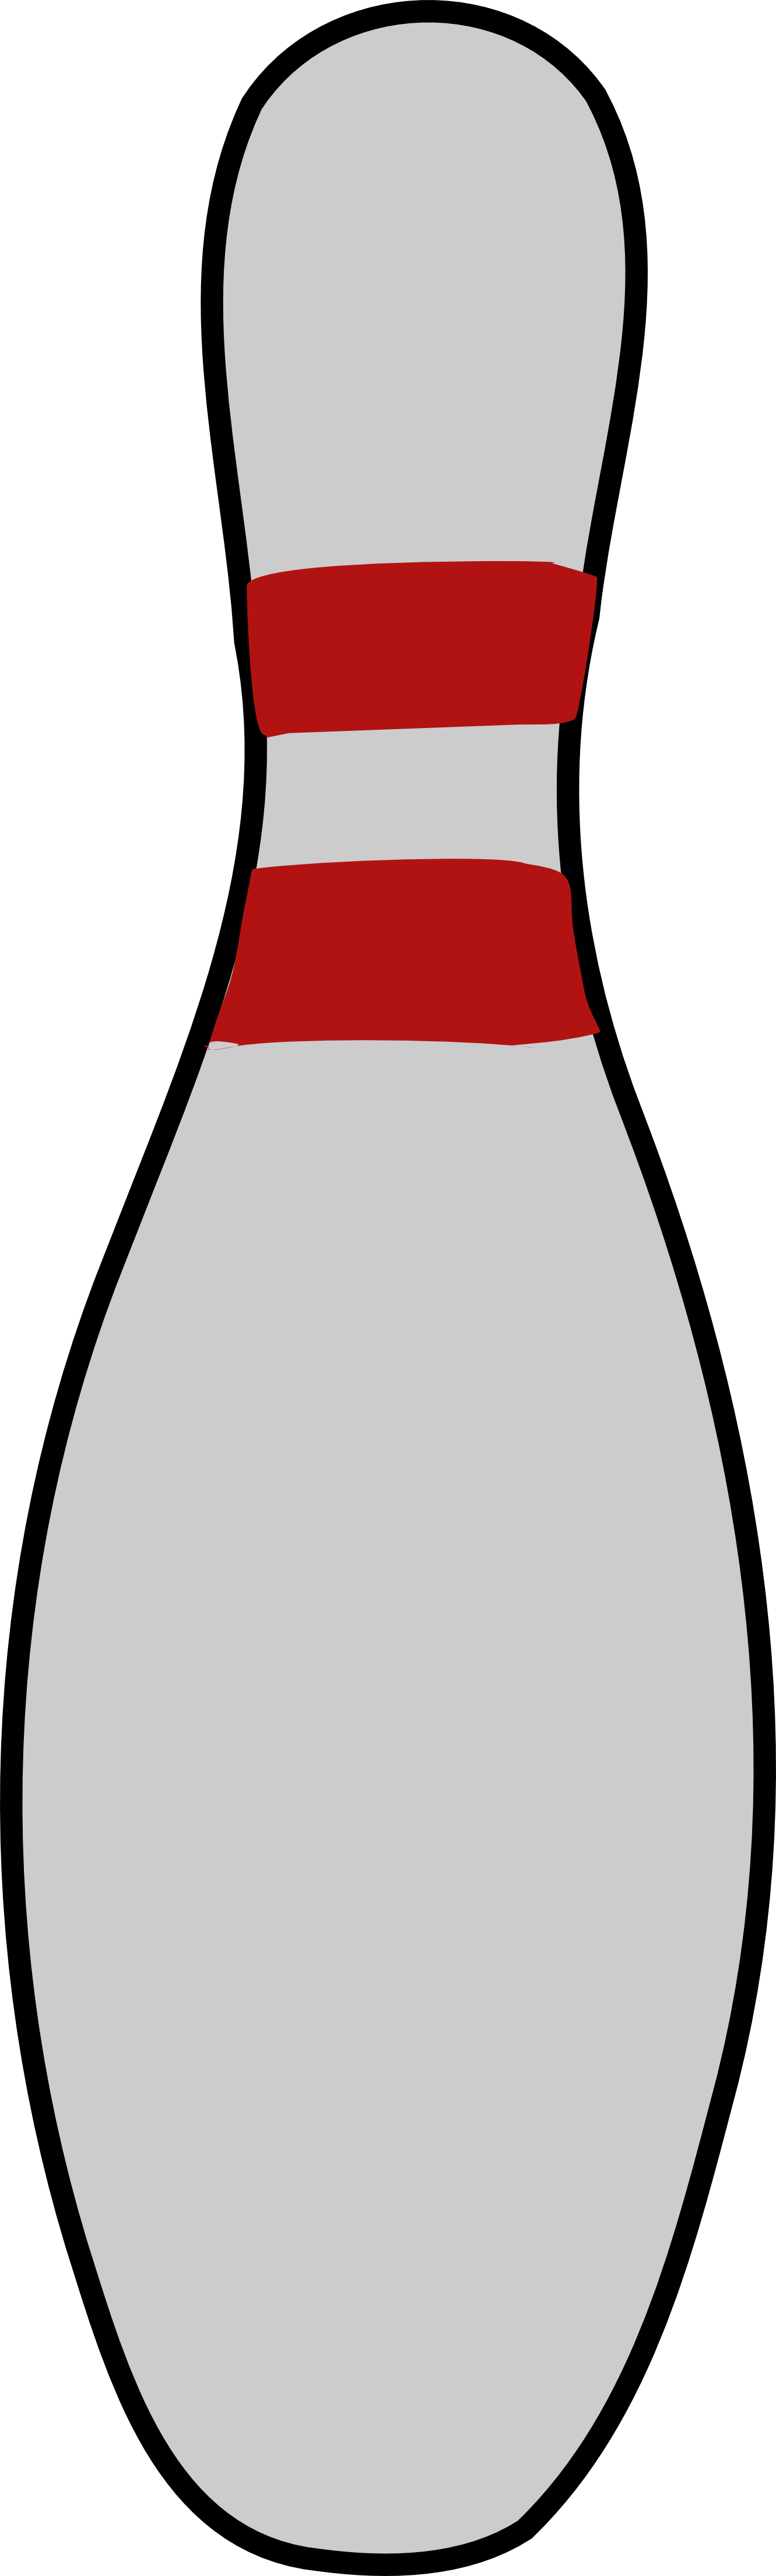 Bowling Pin 3 Coloring Book Colouring Letters colouringbook.org ...